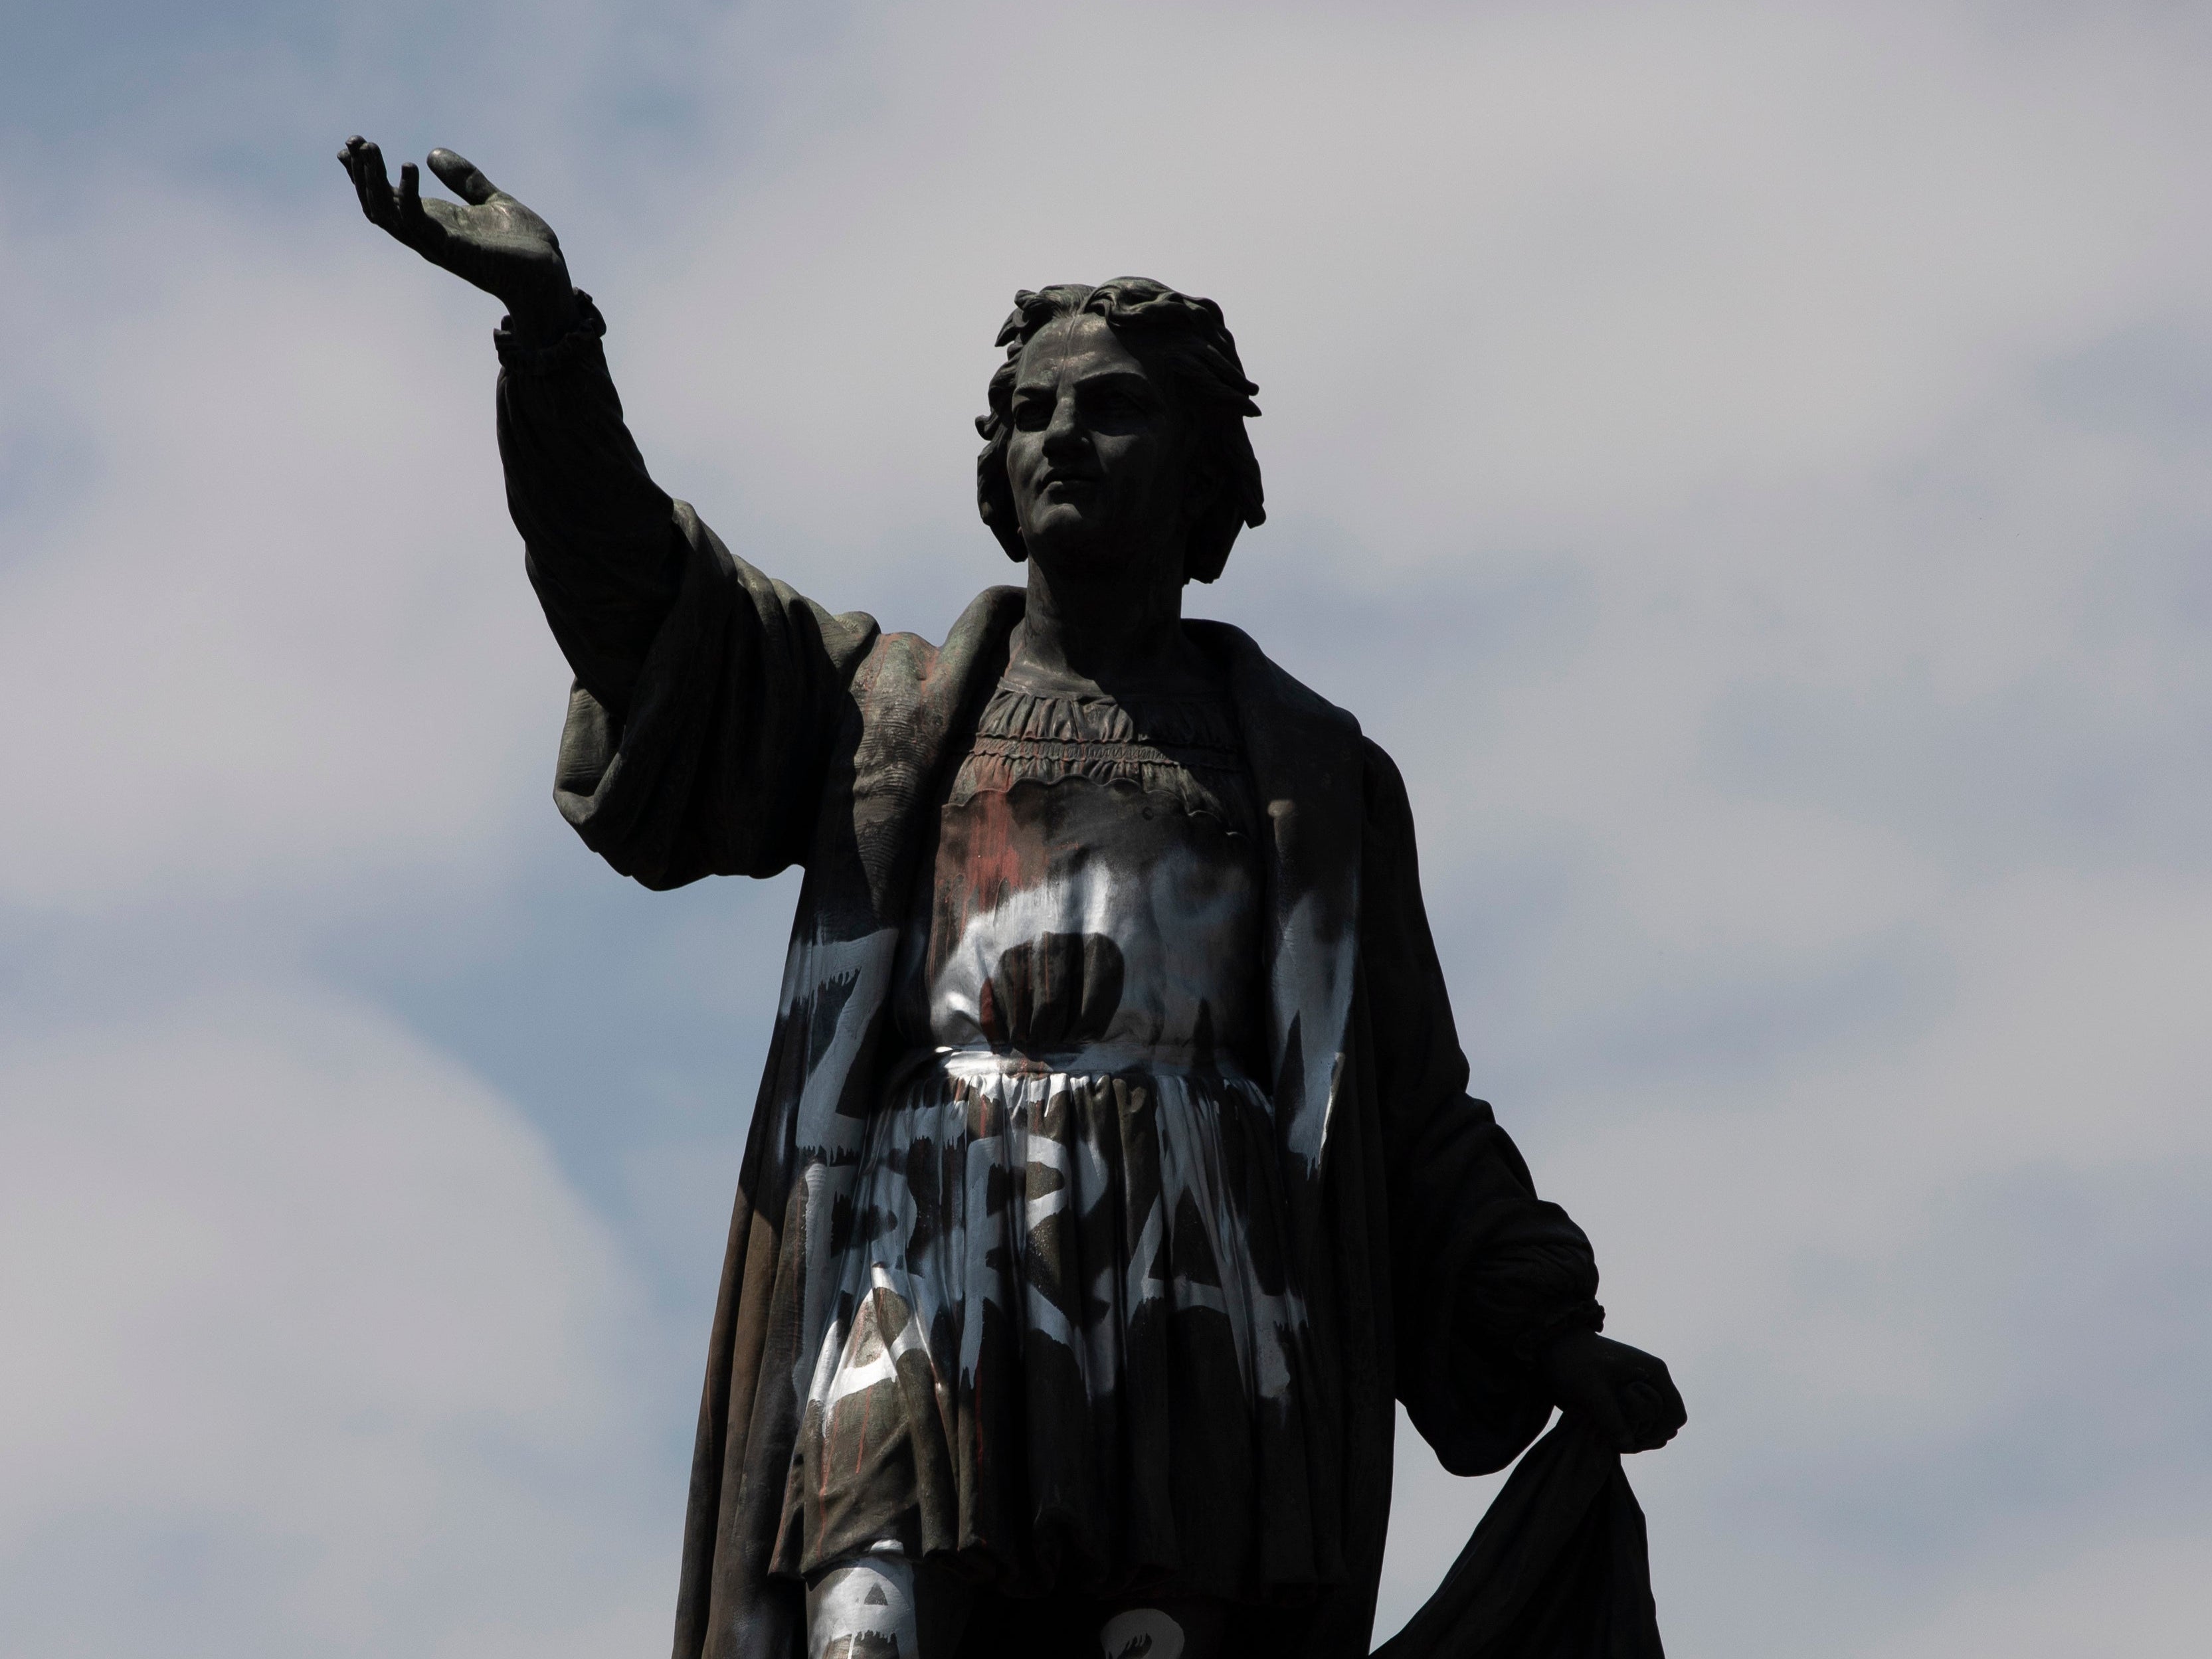 A Mexico City statue of Christopher Columbus was defaced last September